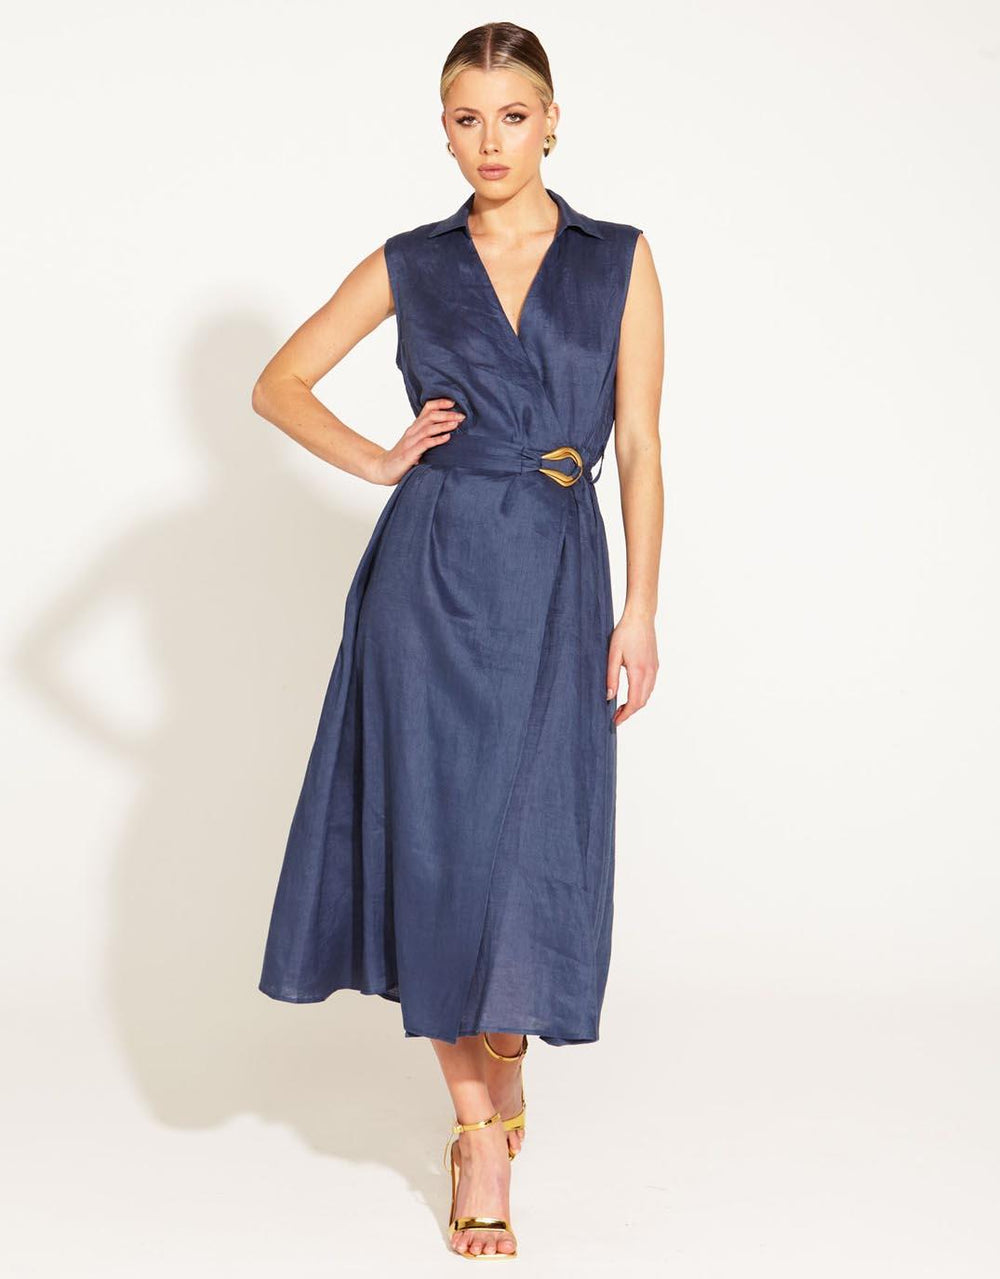 Fate and Becker - A Walk In The Park Sleeveless Dress - Navy - White & Co Living Dresses